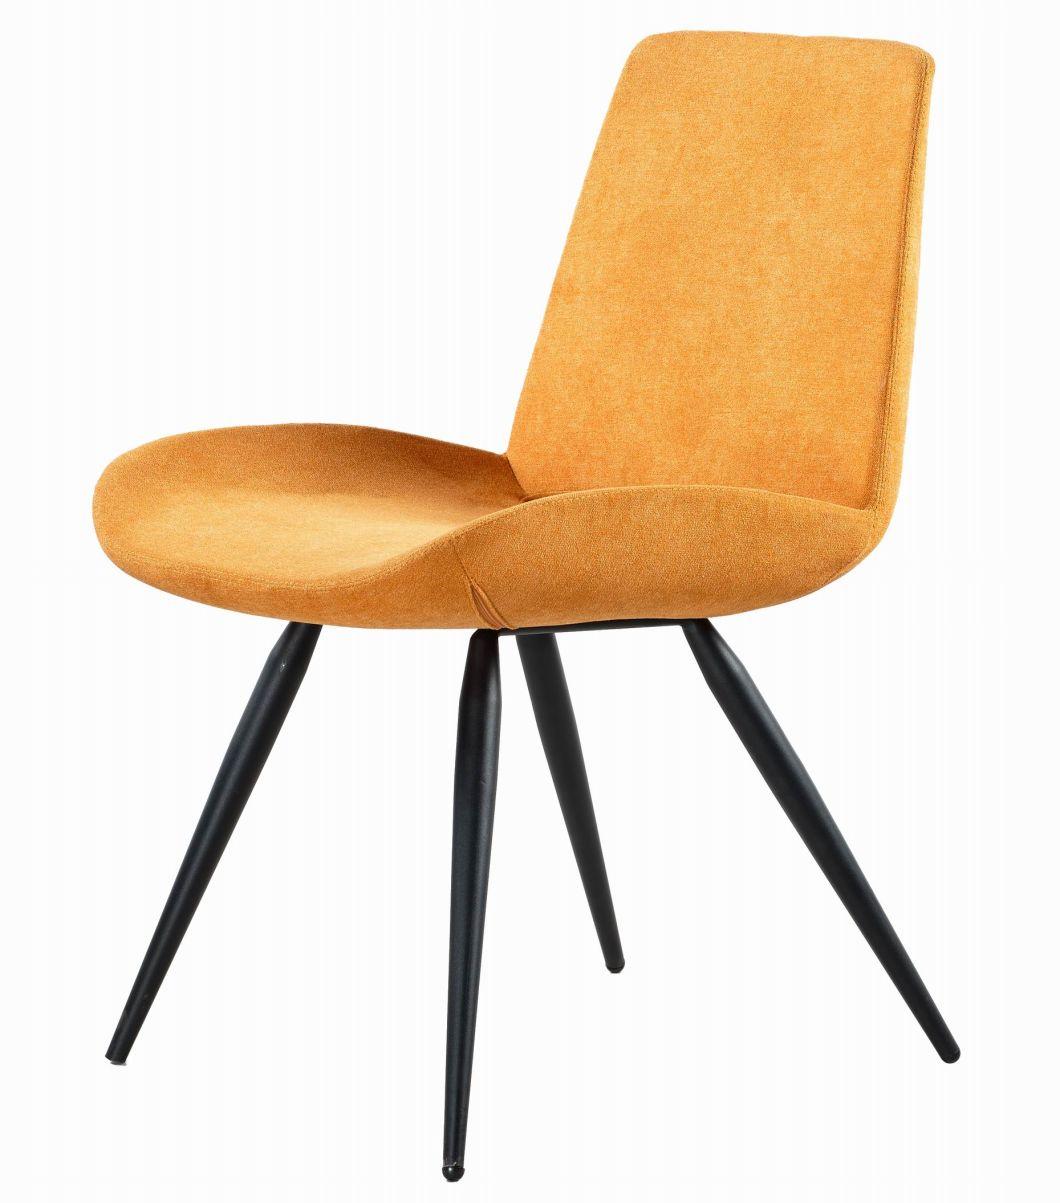 Chinese Quality Supplier of Soft Upholster Restaurant Catering Dining Chair